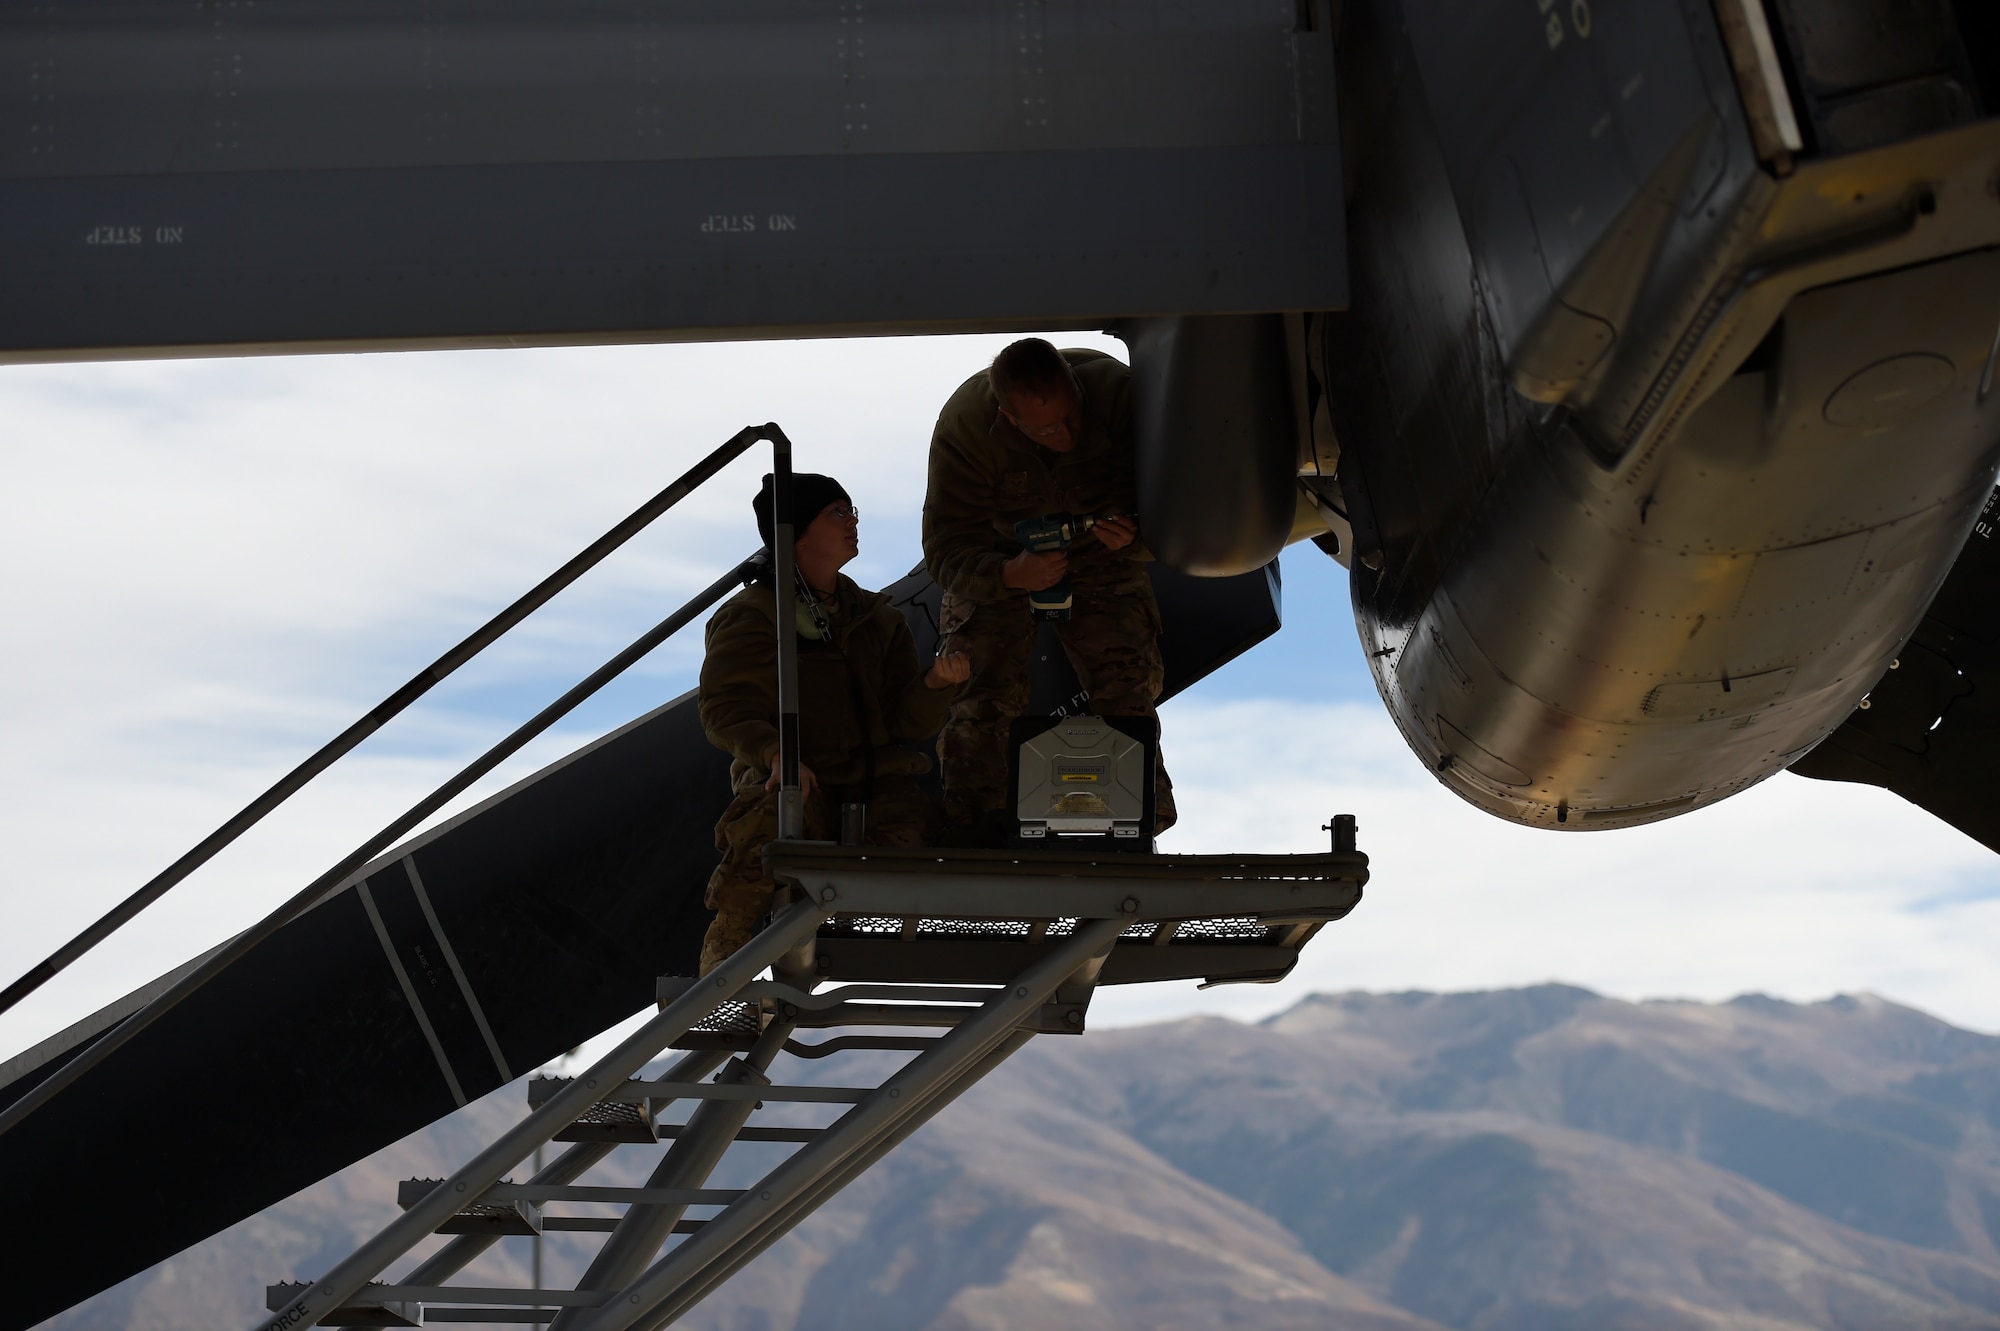 Staff Sgt. Melissa Moss and Senior Airman Daniel Gurka, crew chiefs with the 901st Aircraft Maintenance Squadron, reattach an engine cover after performing maintenance on a CV-22B Osprey at Hill Air Force Base, Utah, Nov. 2, 2015. The exercise allowed Airmen to perform their duties in a simulated expeditionary environment outside of their home stations. (U.S. Air Force by Airman Kai White)